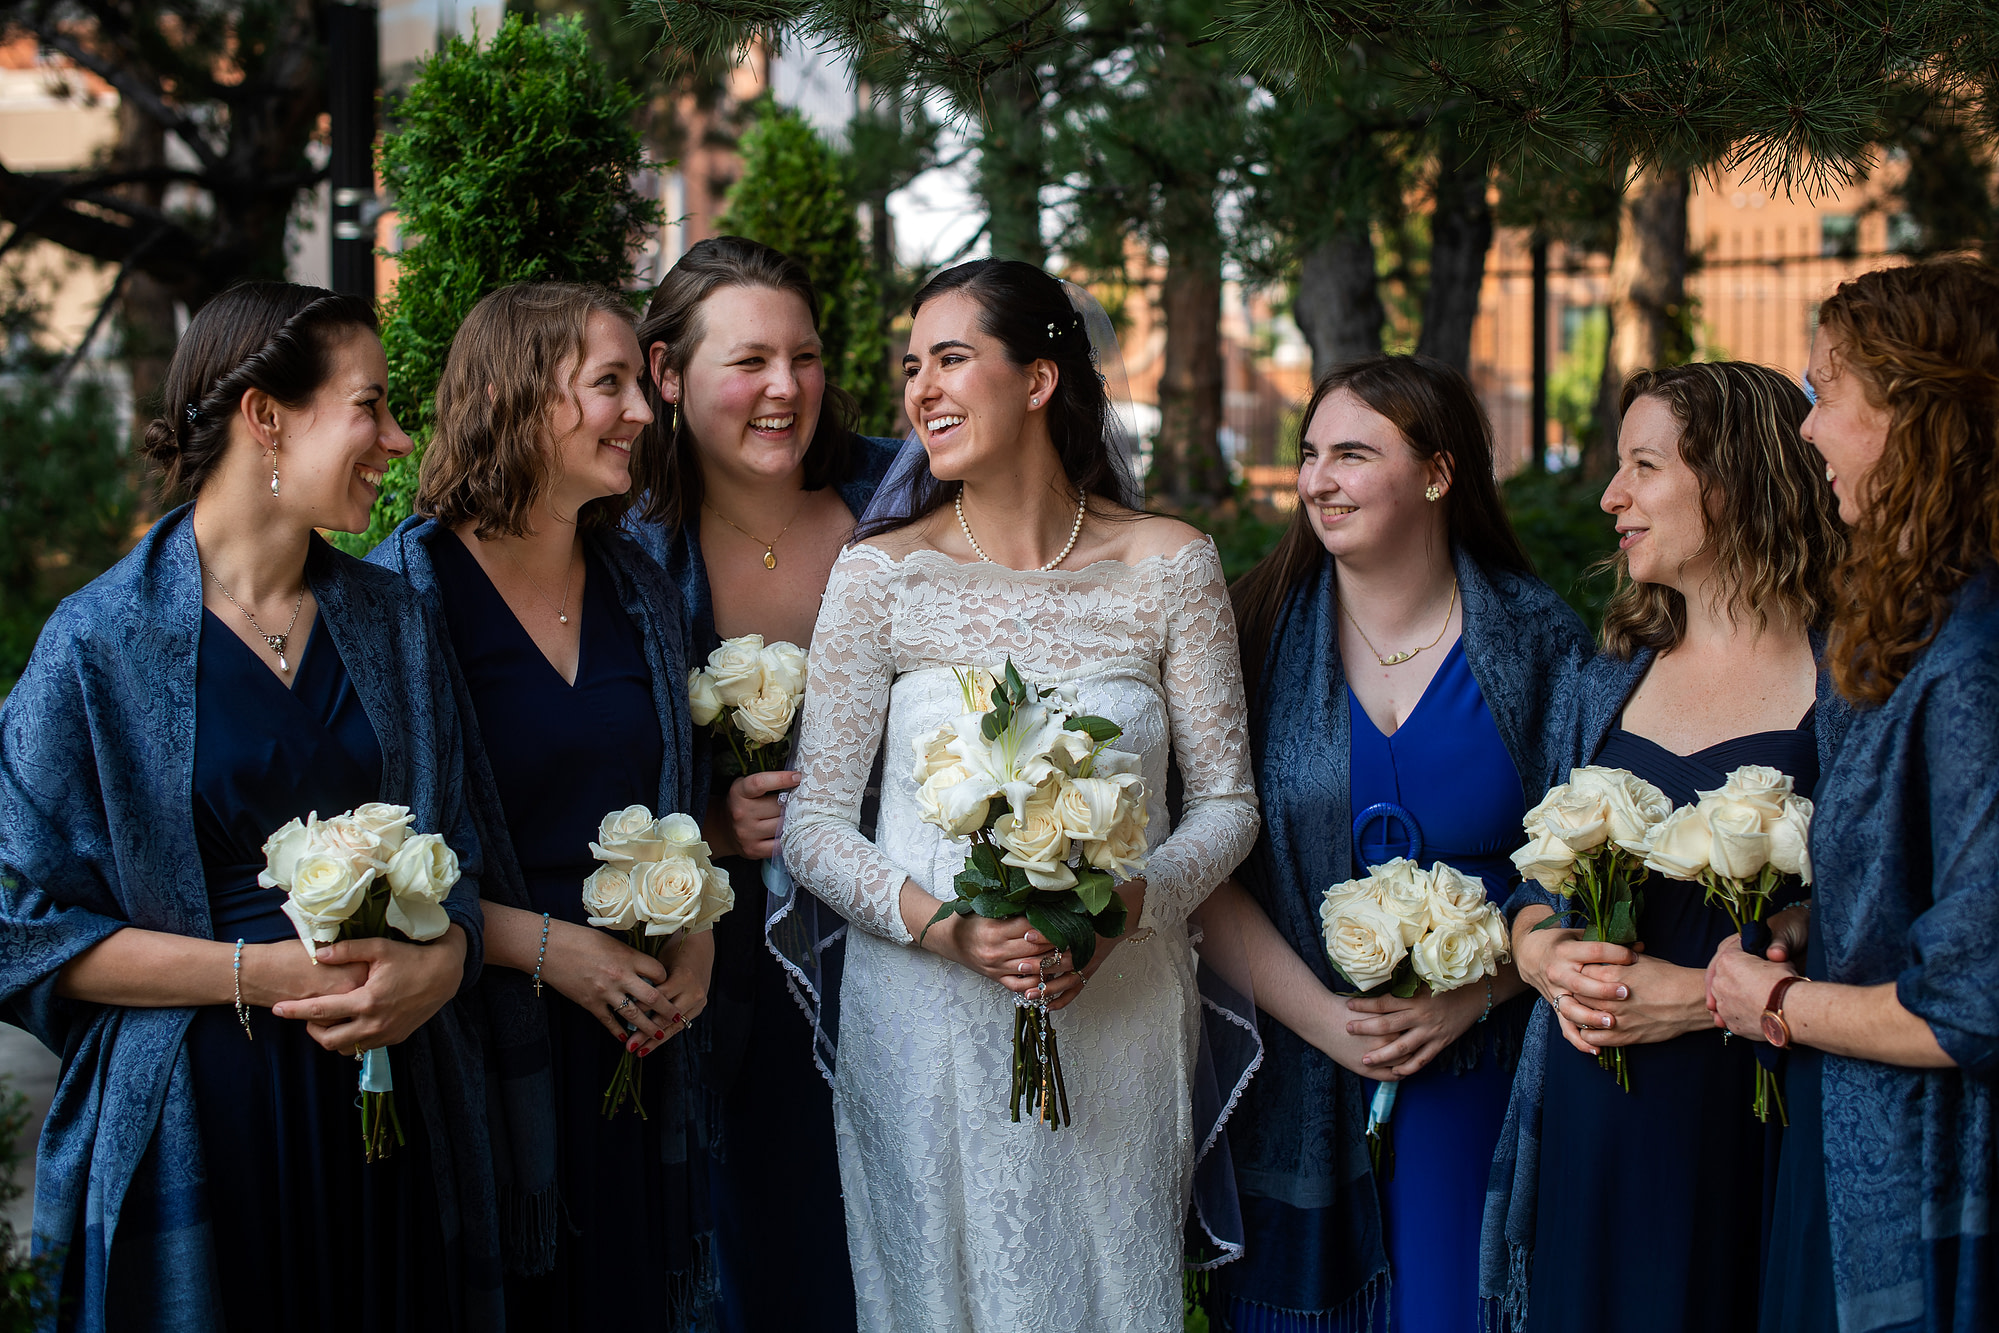 Aurora and bridesmaids talk after her wedding at the Cathedral Basilica of the Immaculate Conception in Denver, Colorado.